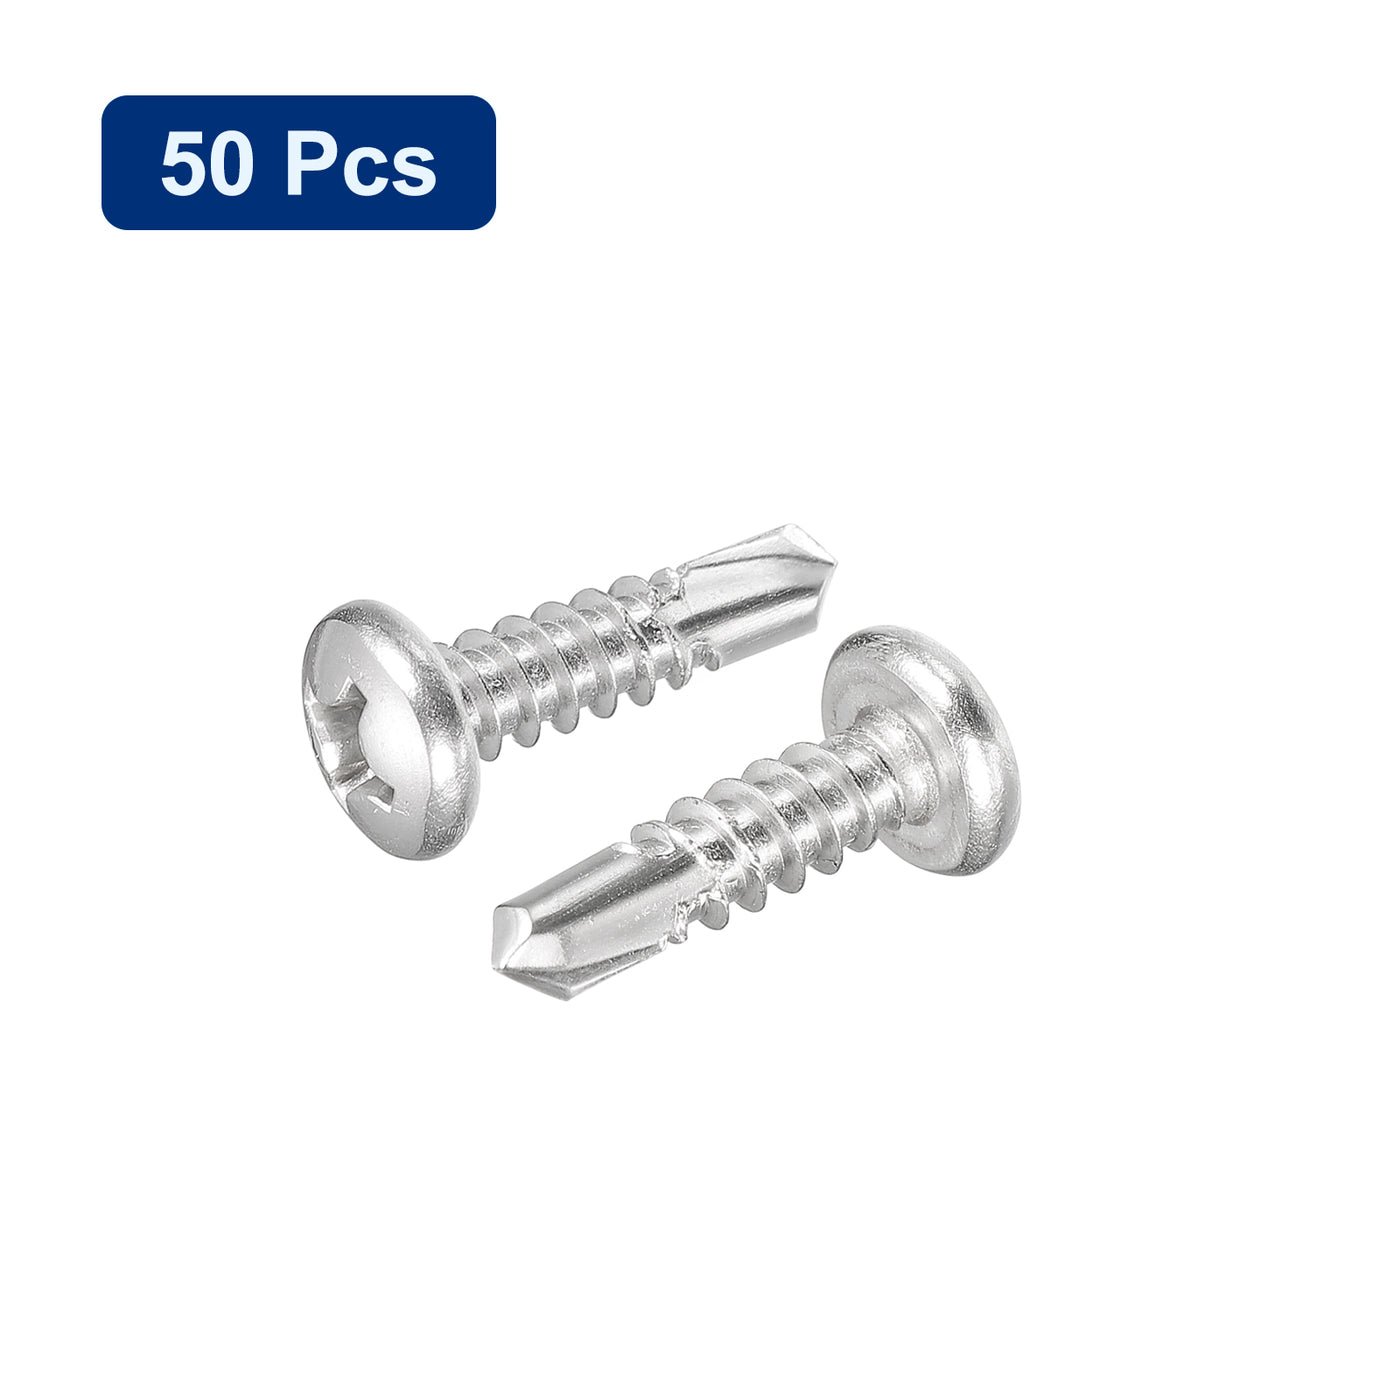 uxcell Uxcell #12 x 3/4" Self Drilling Screws, 50pcs Phillips Pan Head Self Tapping Screws